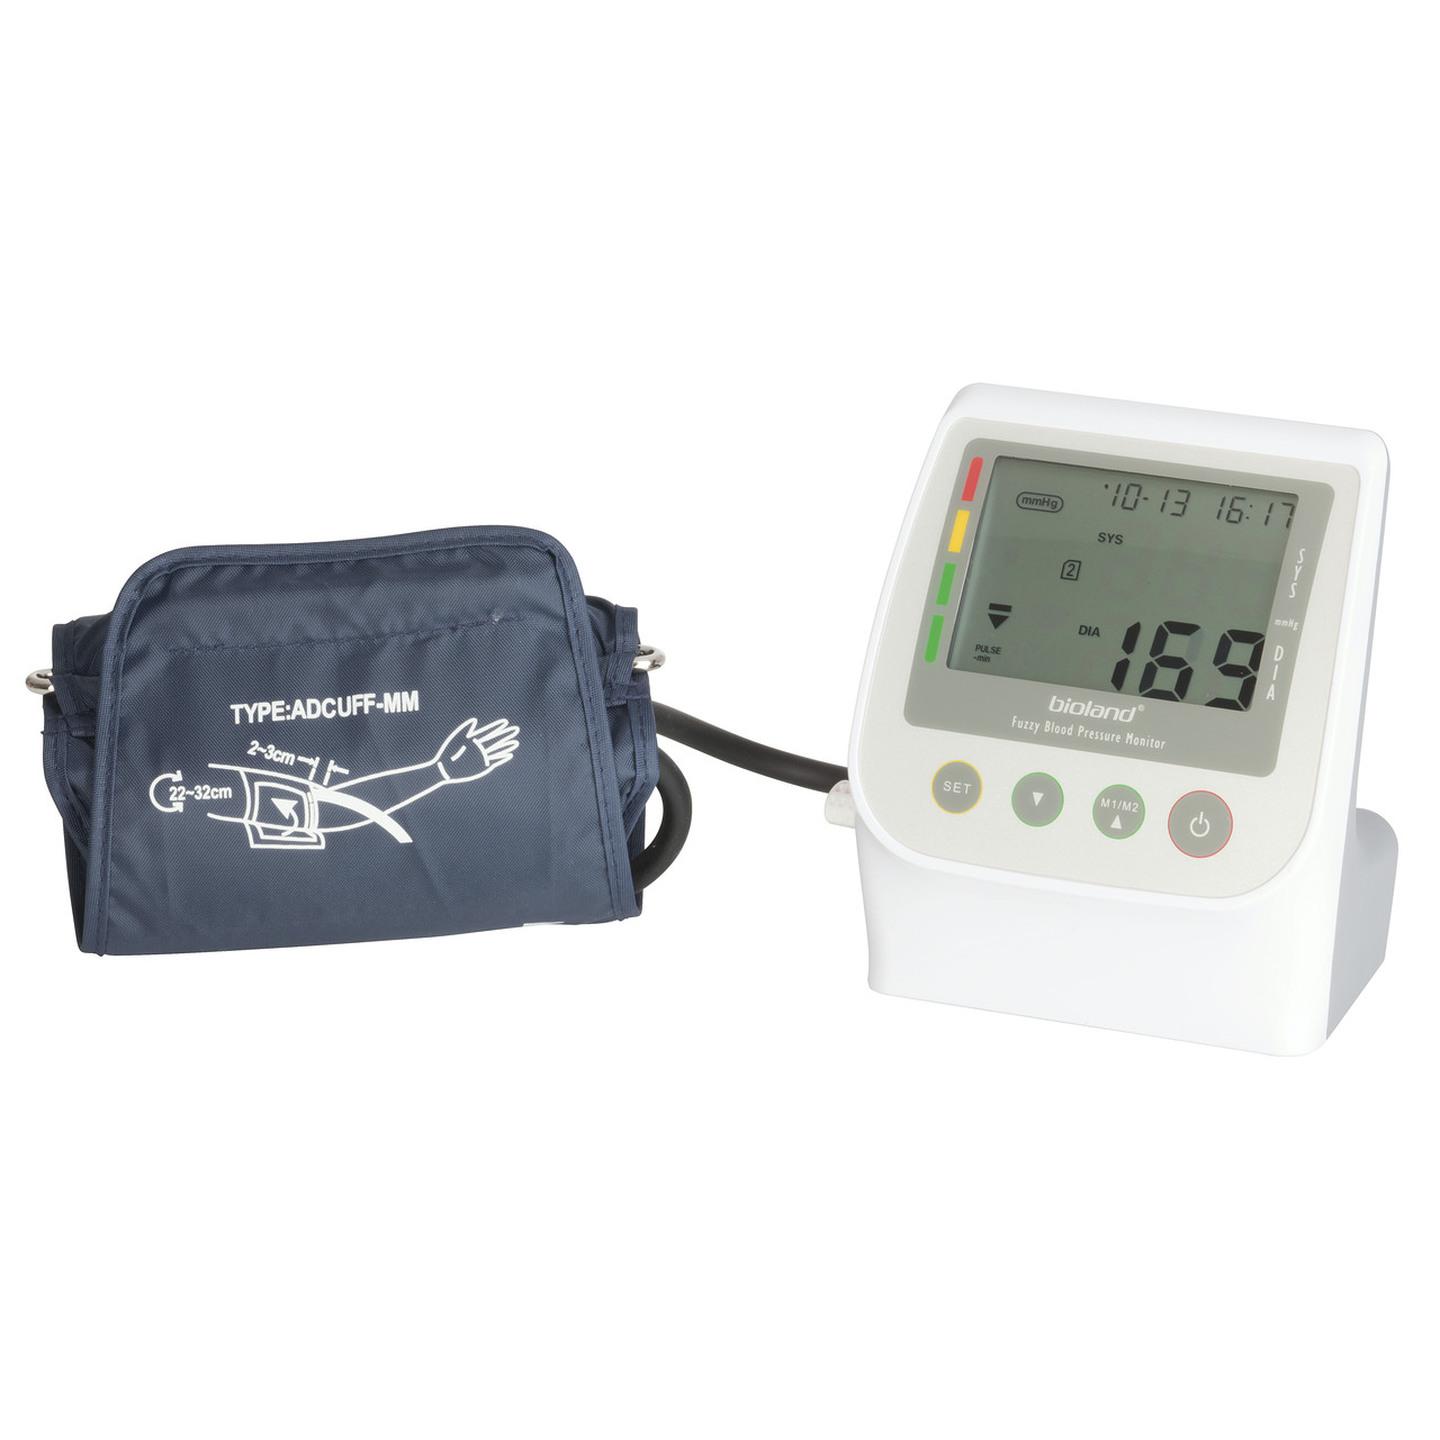 MONITOR BLOOD PRESSURE UPPER ARM AUT LCD